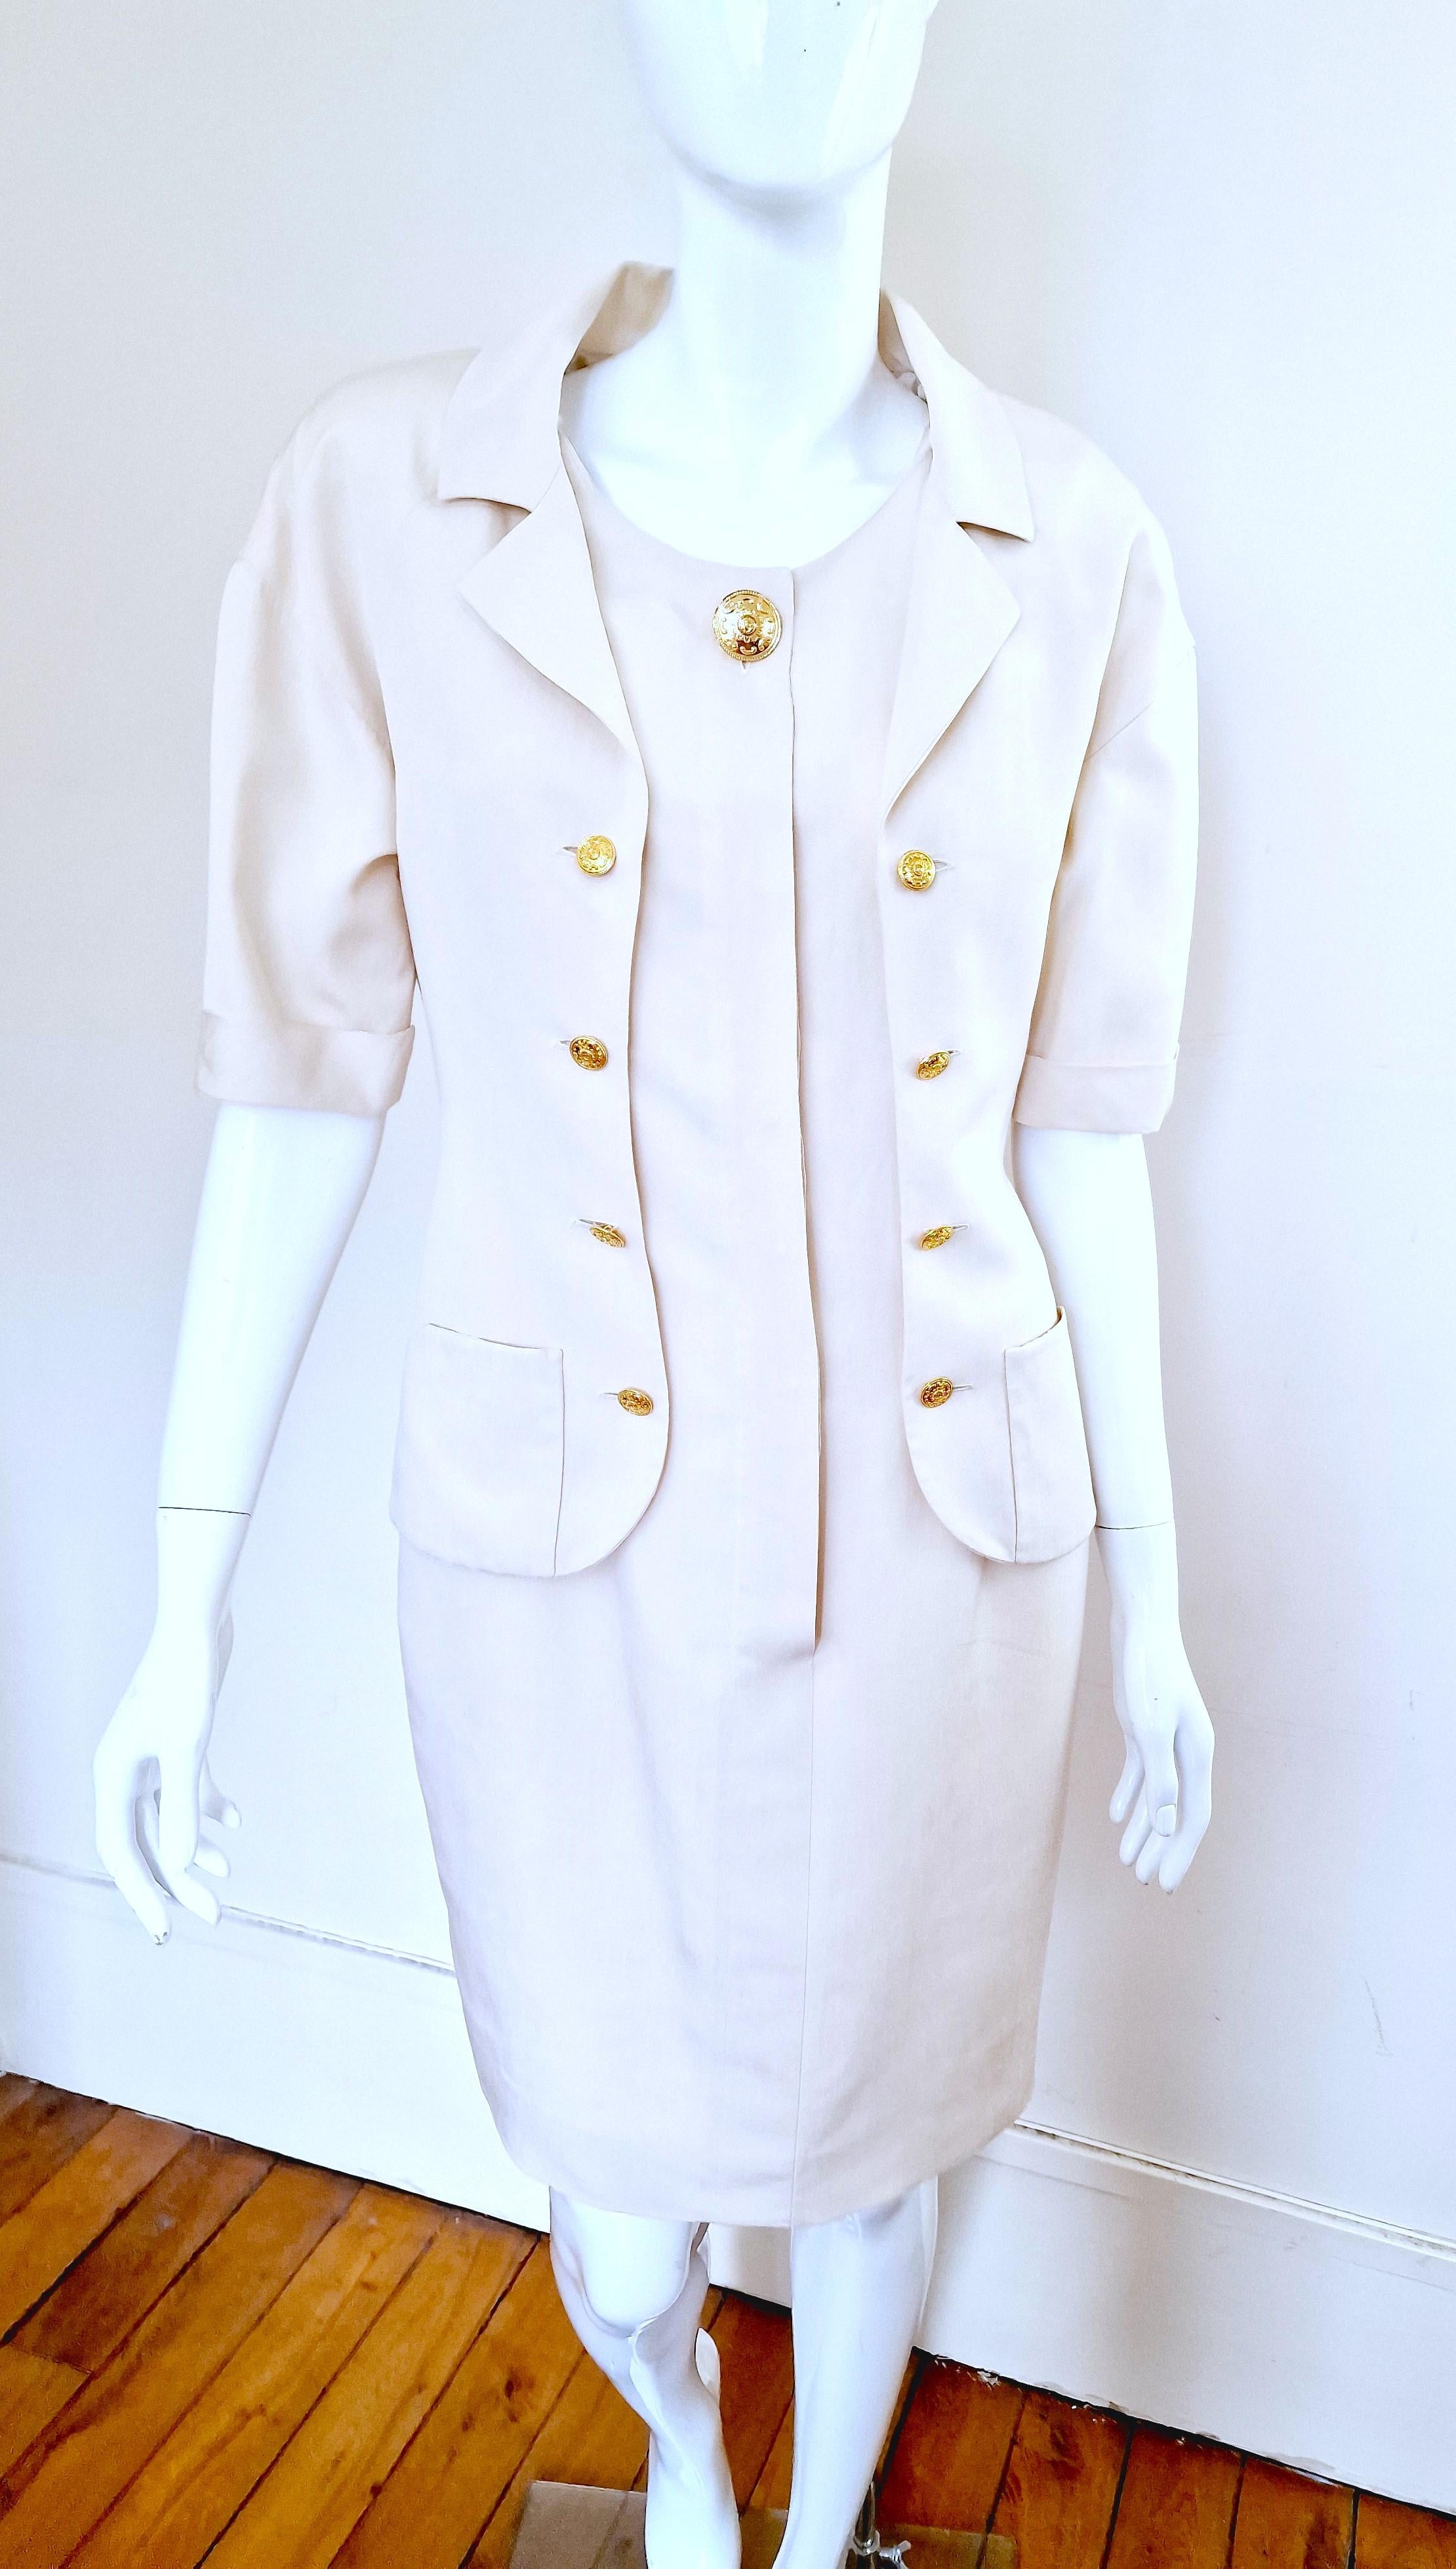 Silk Chanel dress.
One piece dress, it has a suit look. 
Golden logo metal buttons.
With shoulder pads.
Fully lined with Chanel logo.
100% silk

VERY GOOD condition, but it has light discolation at the shoulder. Please, check the last photos. Still